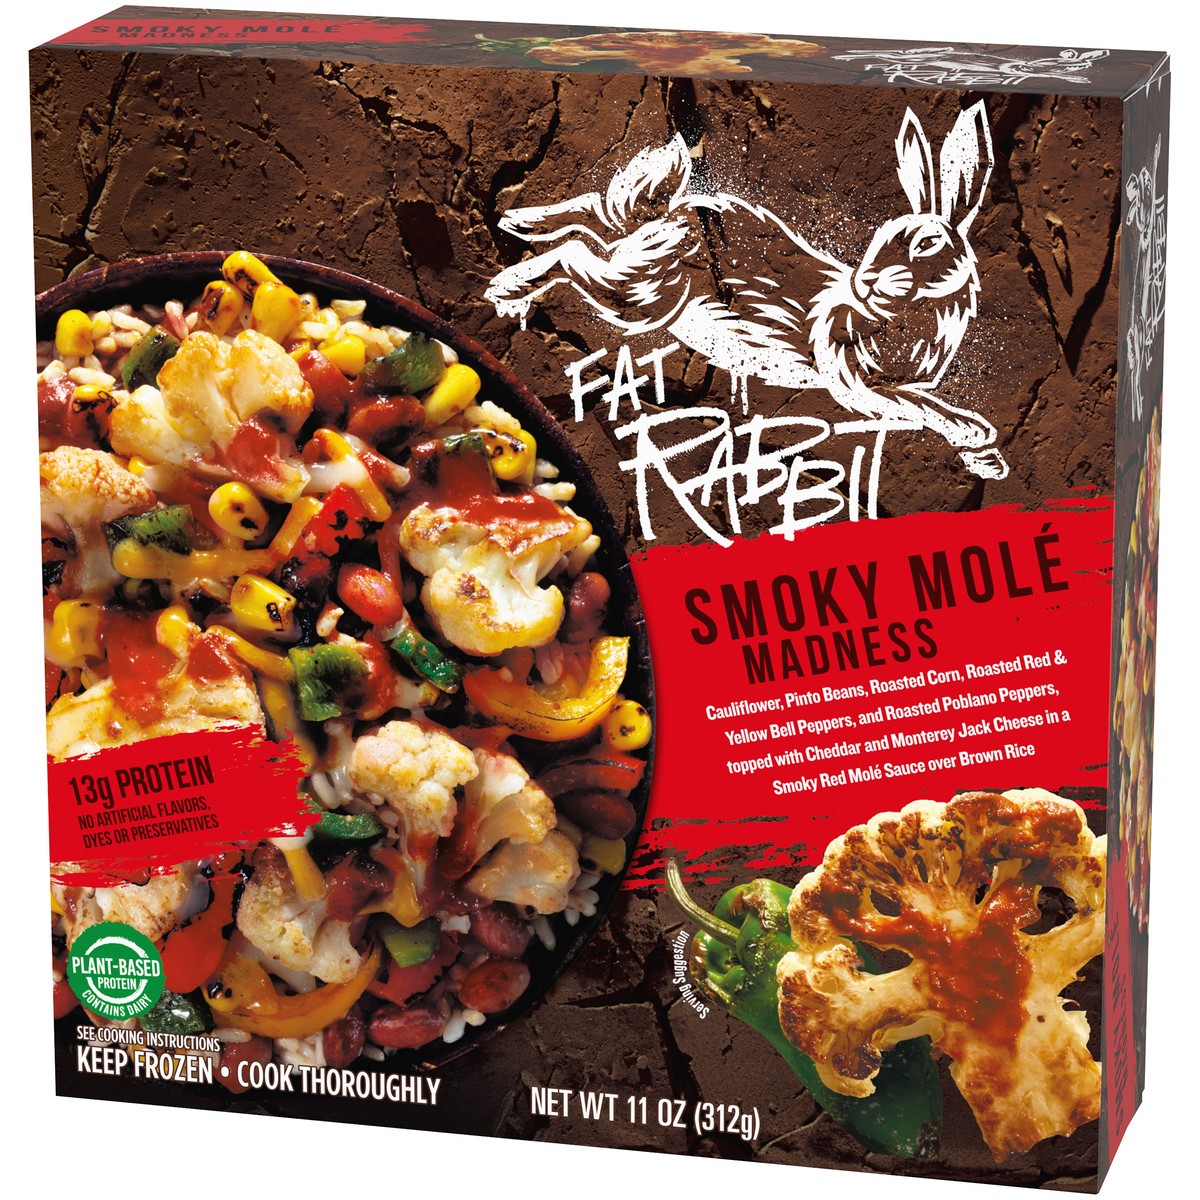 slide 10 of 14, Fat Rabbit Smoky Mole Madness with Roasted Vegetables, Pinto Beans & Cheese in a Red Mole Sauce over Brown Rice Frozen Meal, 11 oz Box, 11 oz